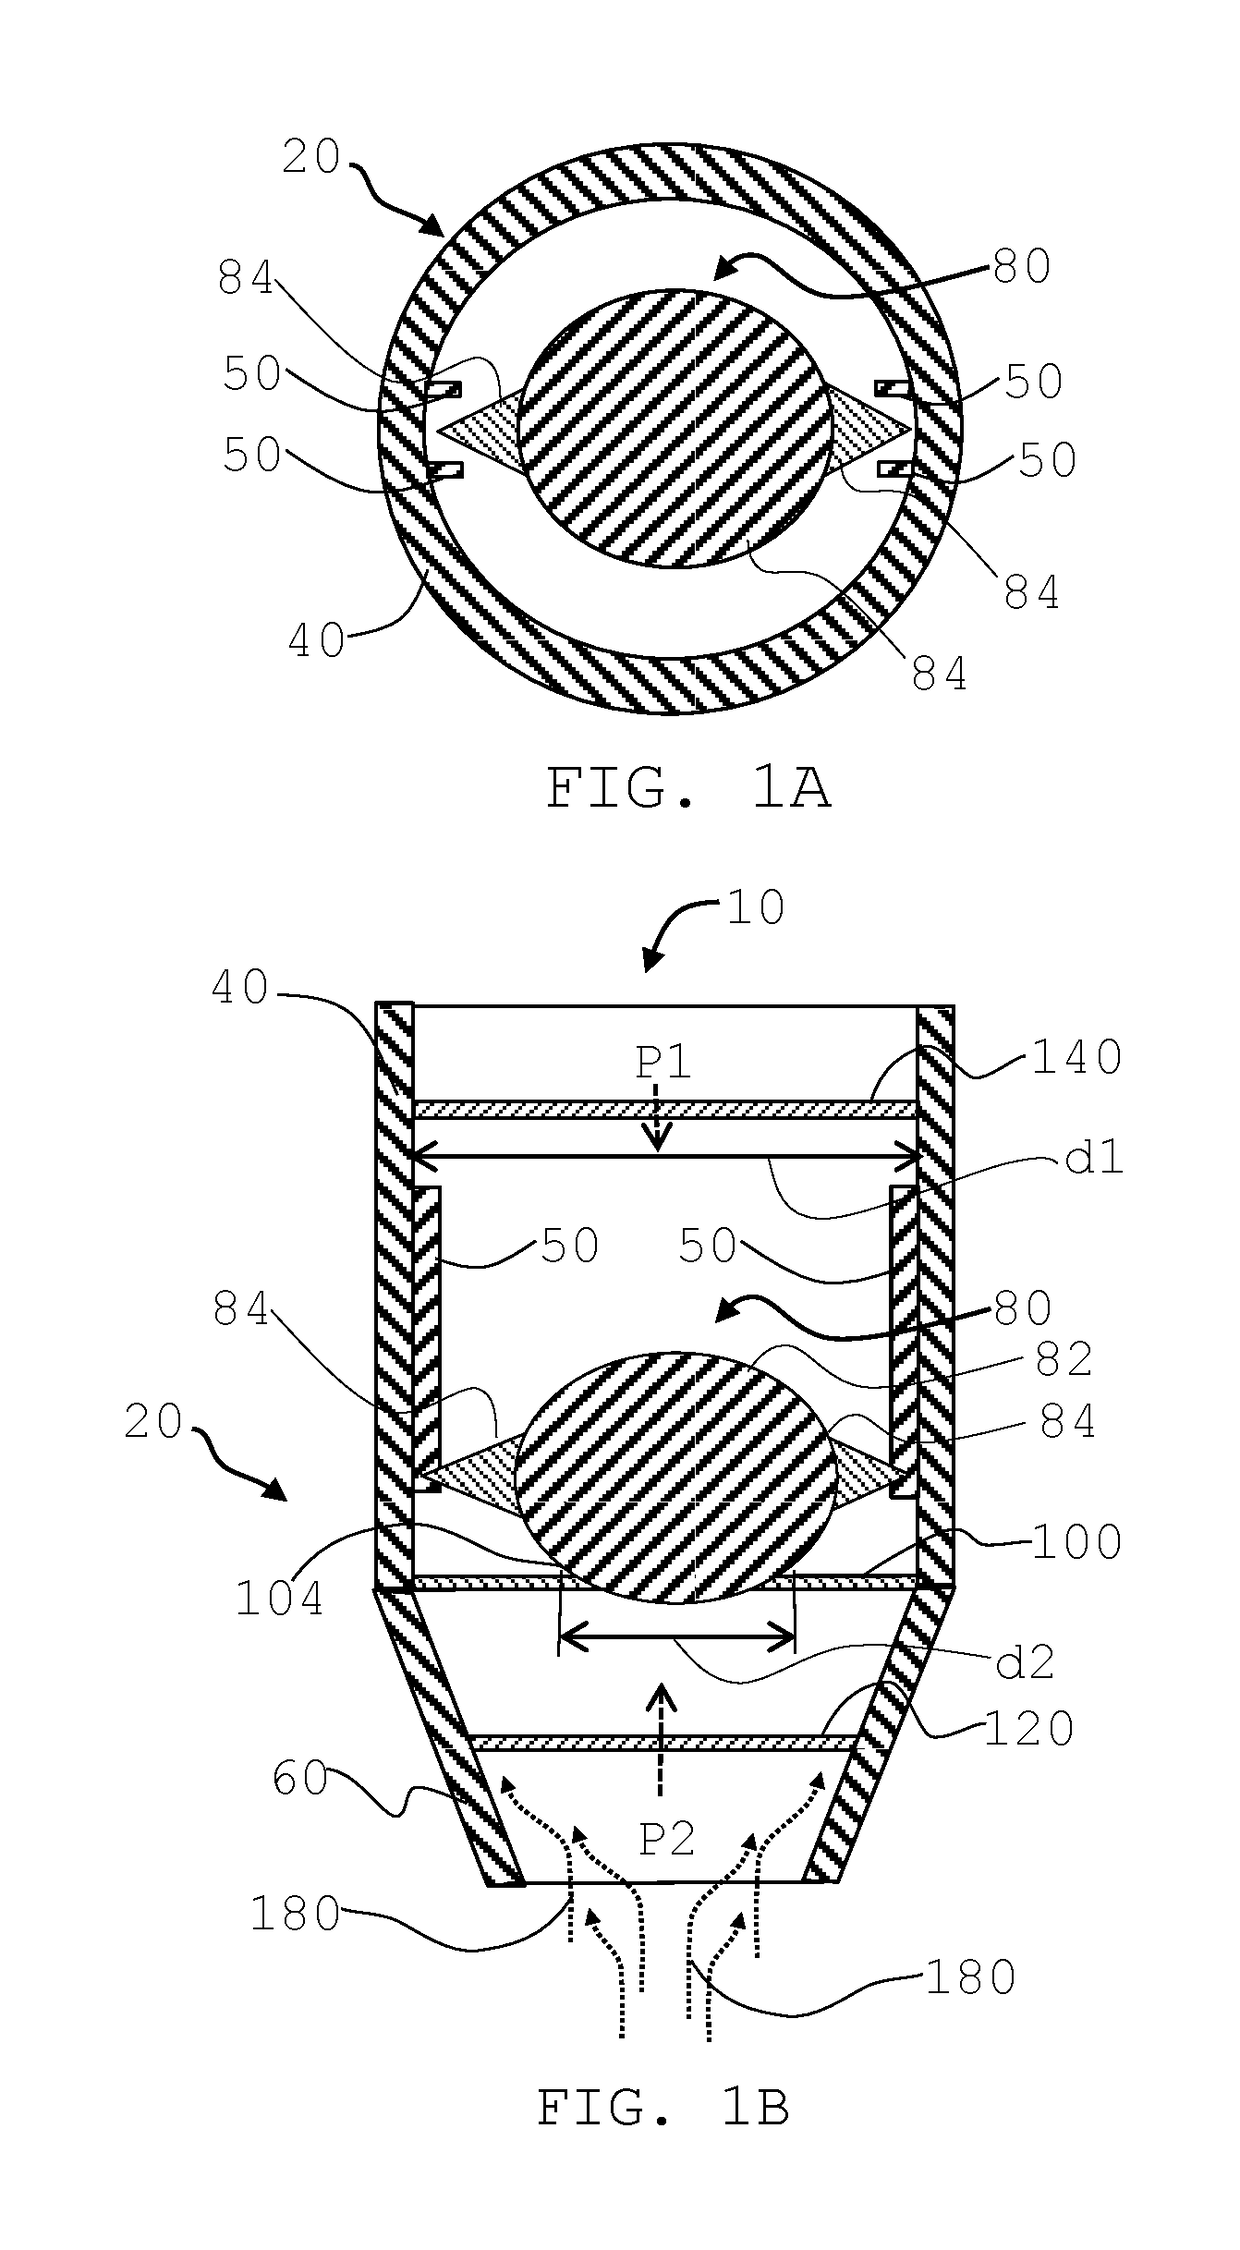 Air admittance and check valve